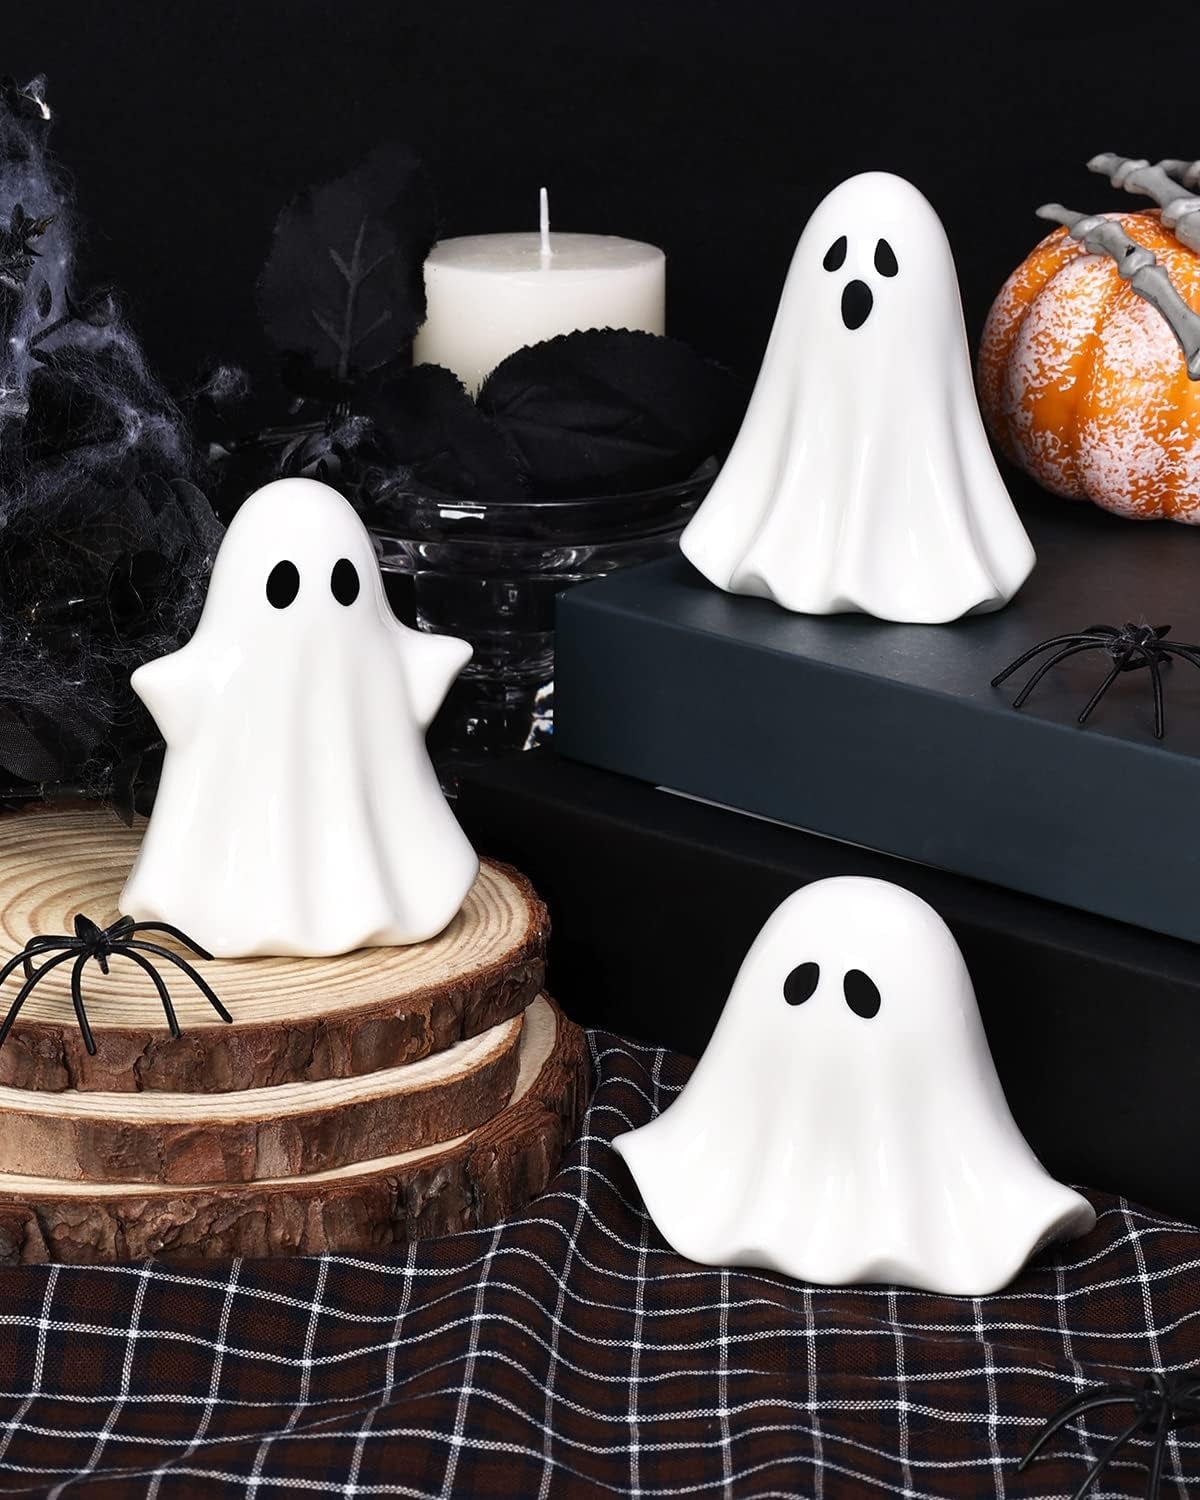 Spooky season has arrived at Jax Wax. Check out the new spooky